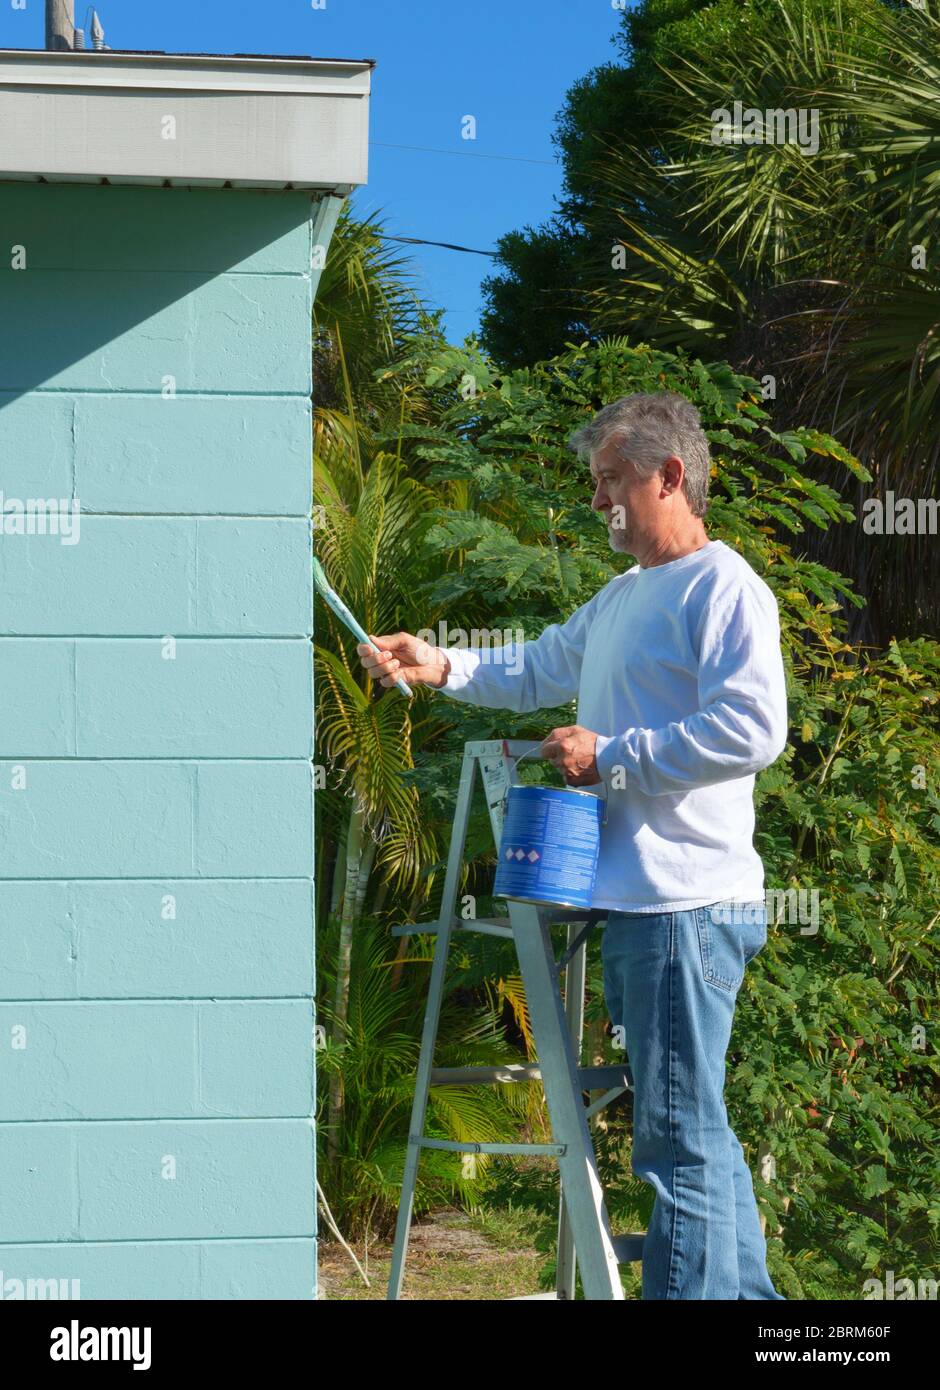 Middle aged professional painter or homeowner man on a ladder with a can of paint and brush painting brushing the exterior of a residential block hous Stock Photo